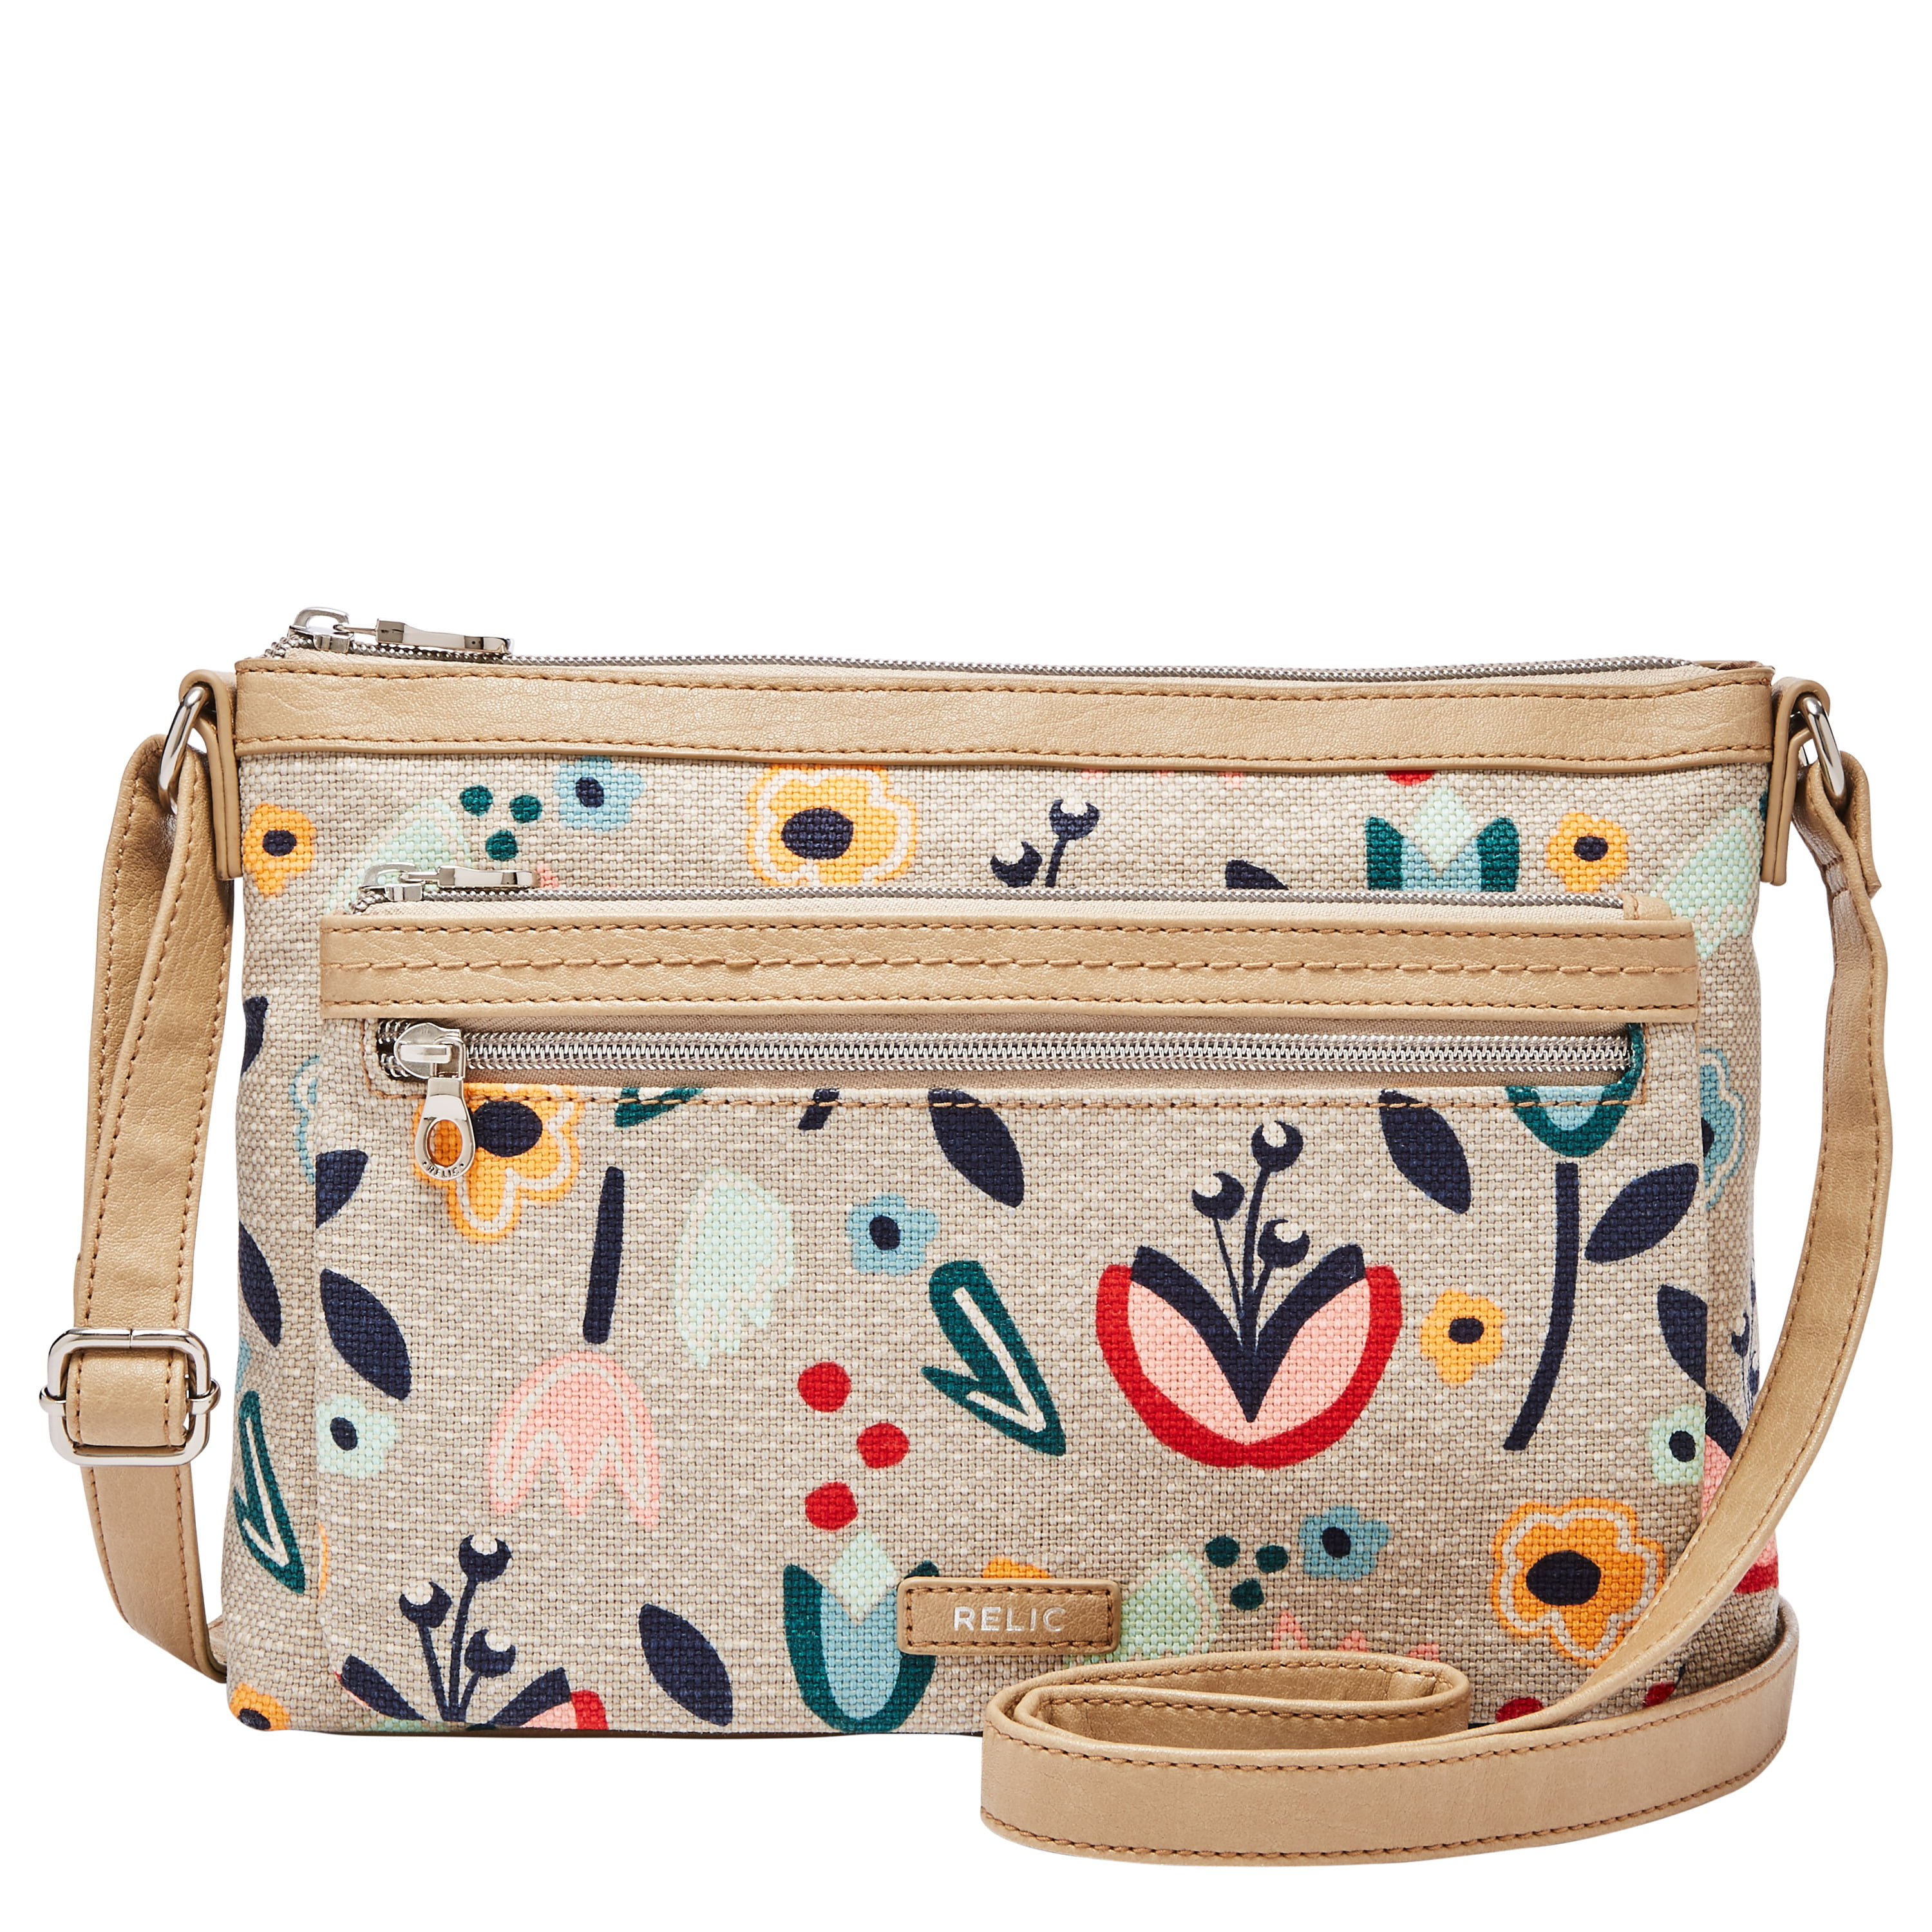 Relic by Fossil Evie Flap Crossbody Bag